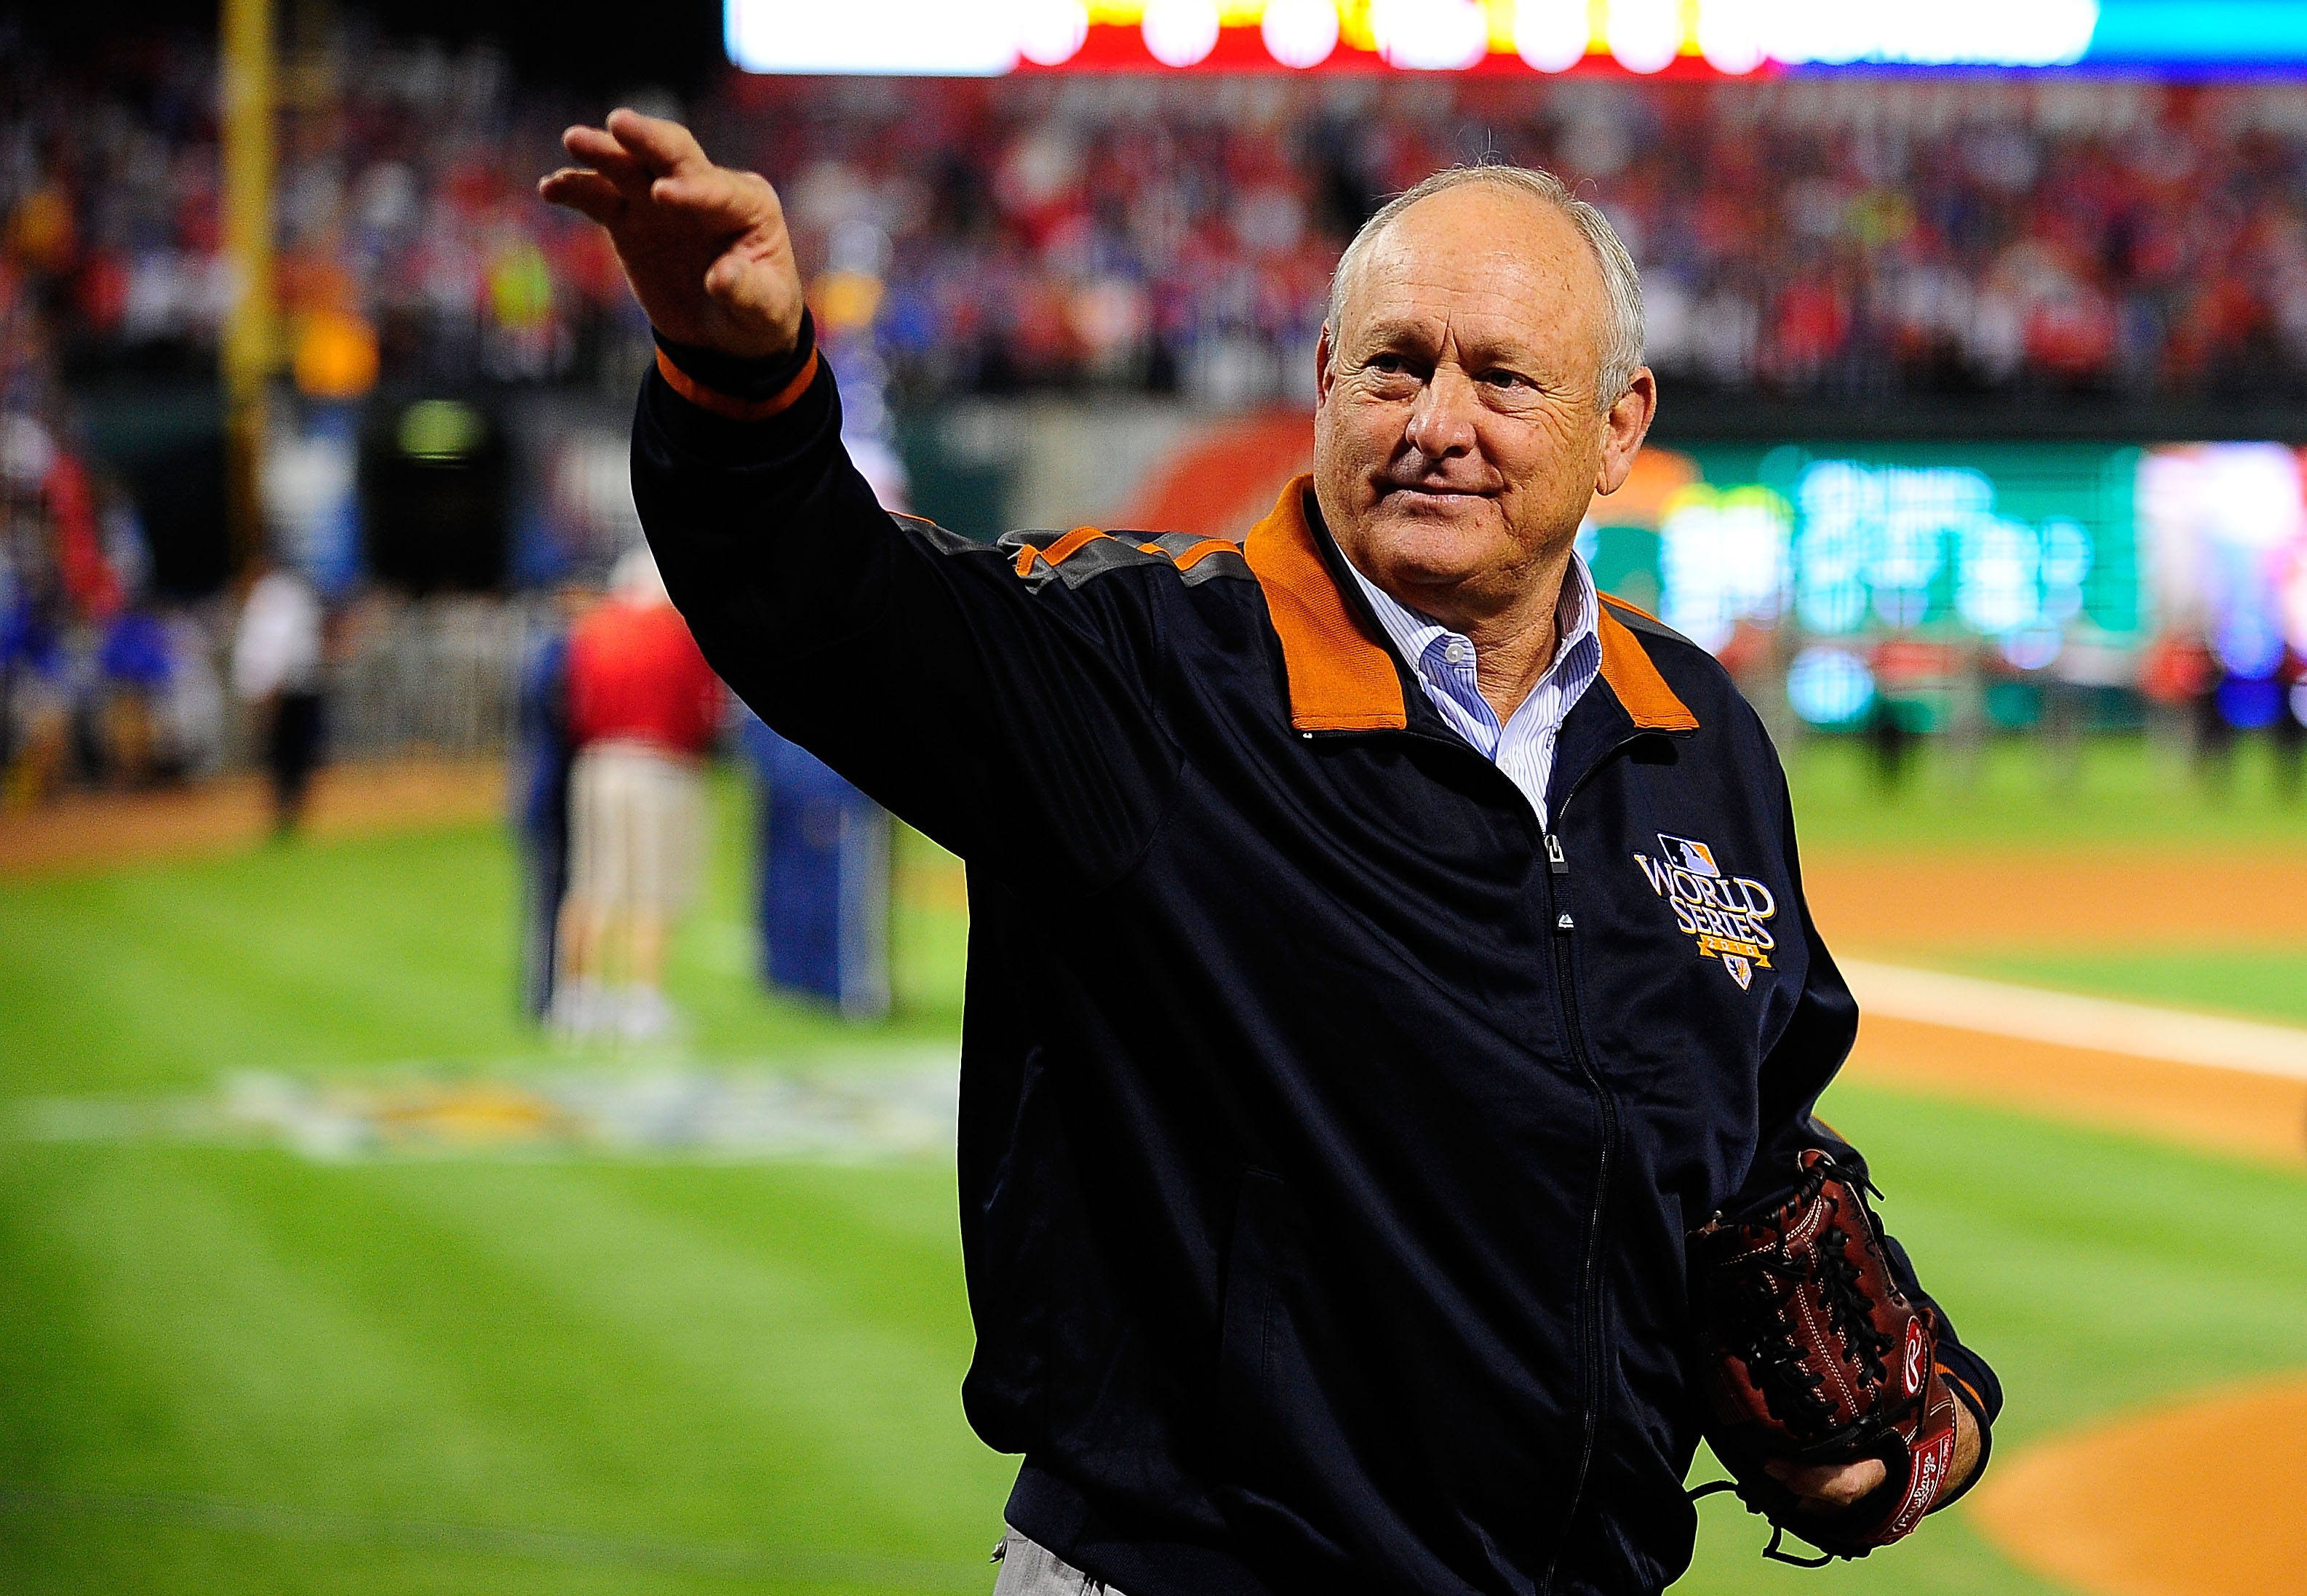 ARLINGTON, TX - OCTOBER 31:  Hall of Famer and Team President Nolan Ryan of the Texas Rangers waves to the crowd before the Rangers take on the San Francisco Giants in Game Four of the 2010 MLB World Series at Rangers Ballpark in Arlington on October 31,